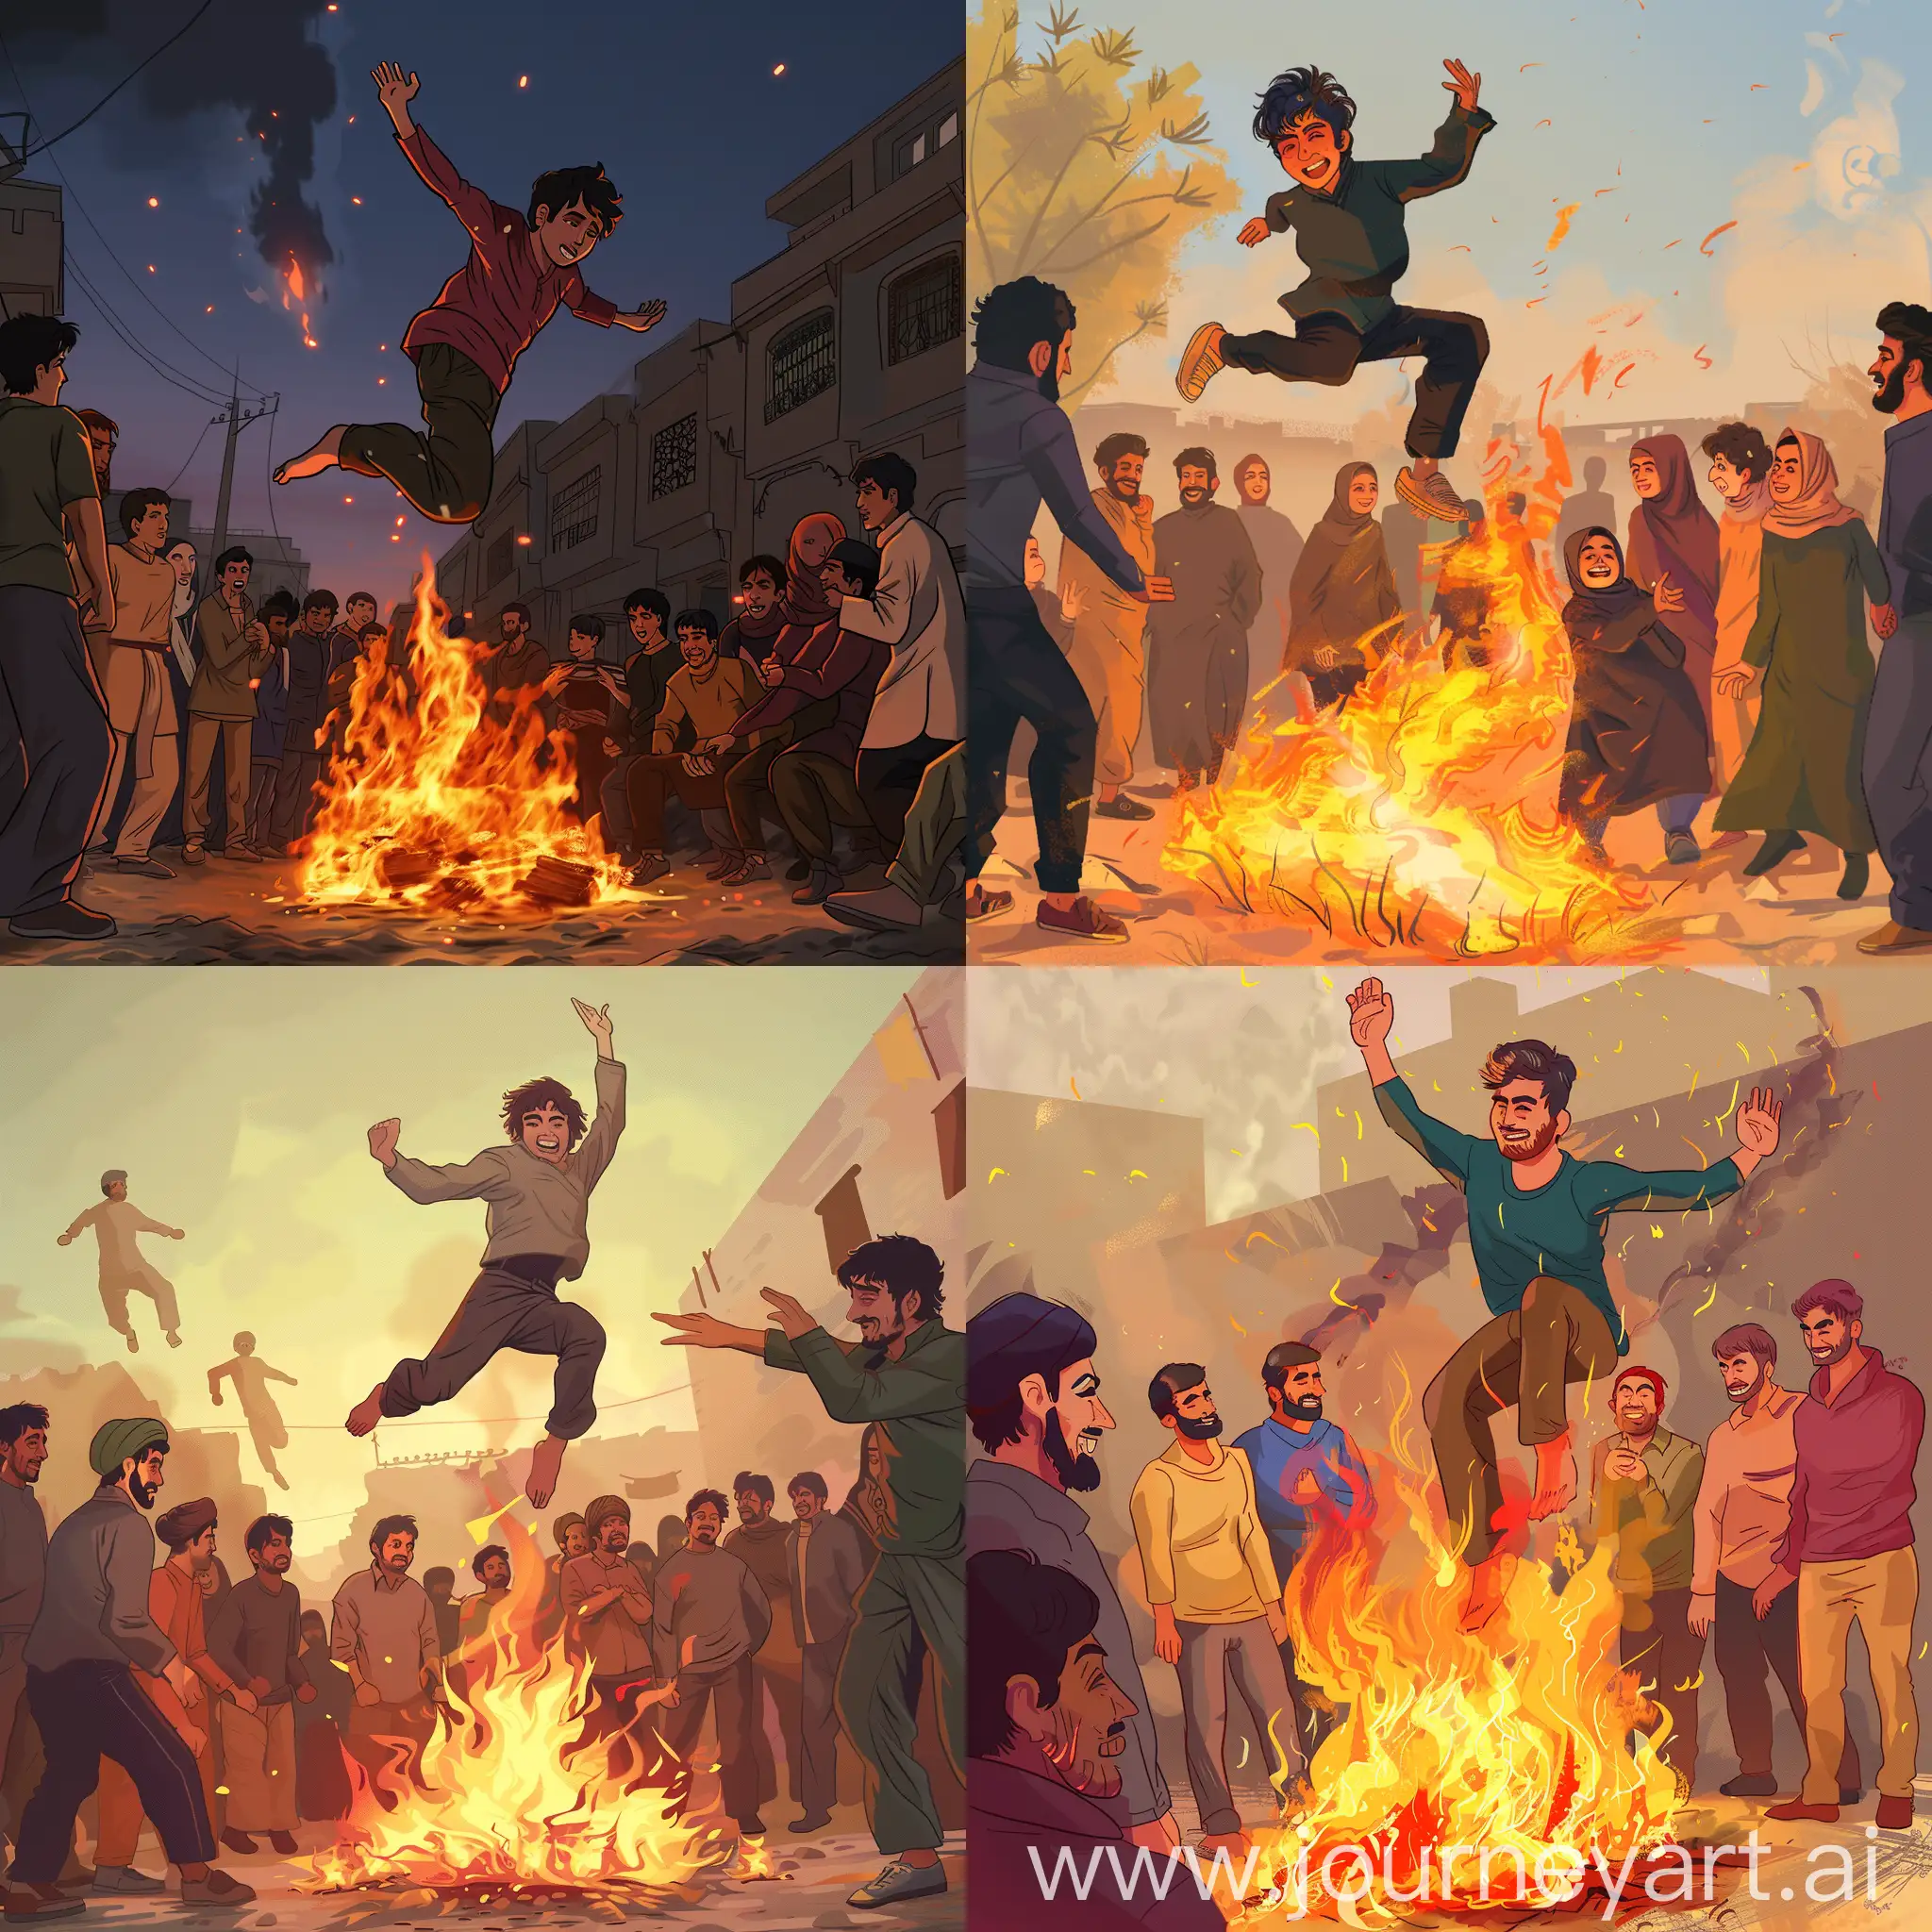 animation style the Iranian Chaharshanbe Suri celebration where people jump over fire and a happy group of people around the fire watching A young man of twenty years jumping over the fire and the man who is jumping is happy , add more detail